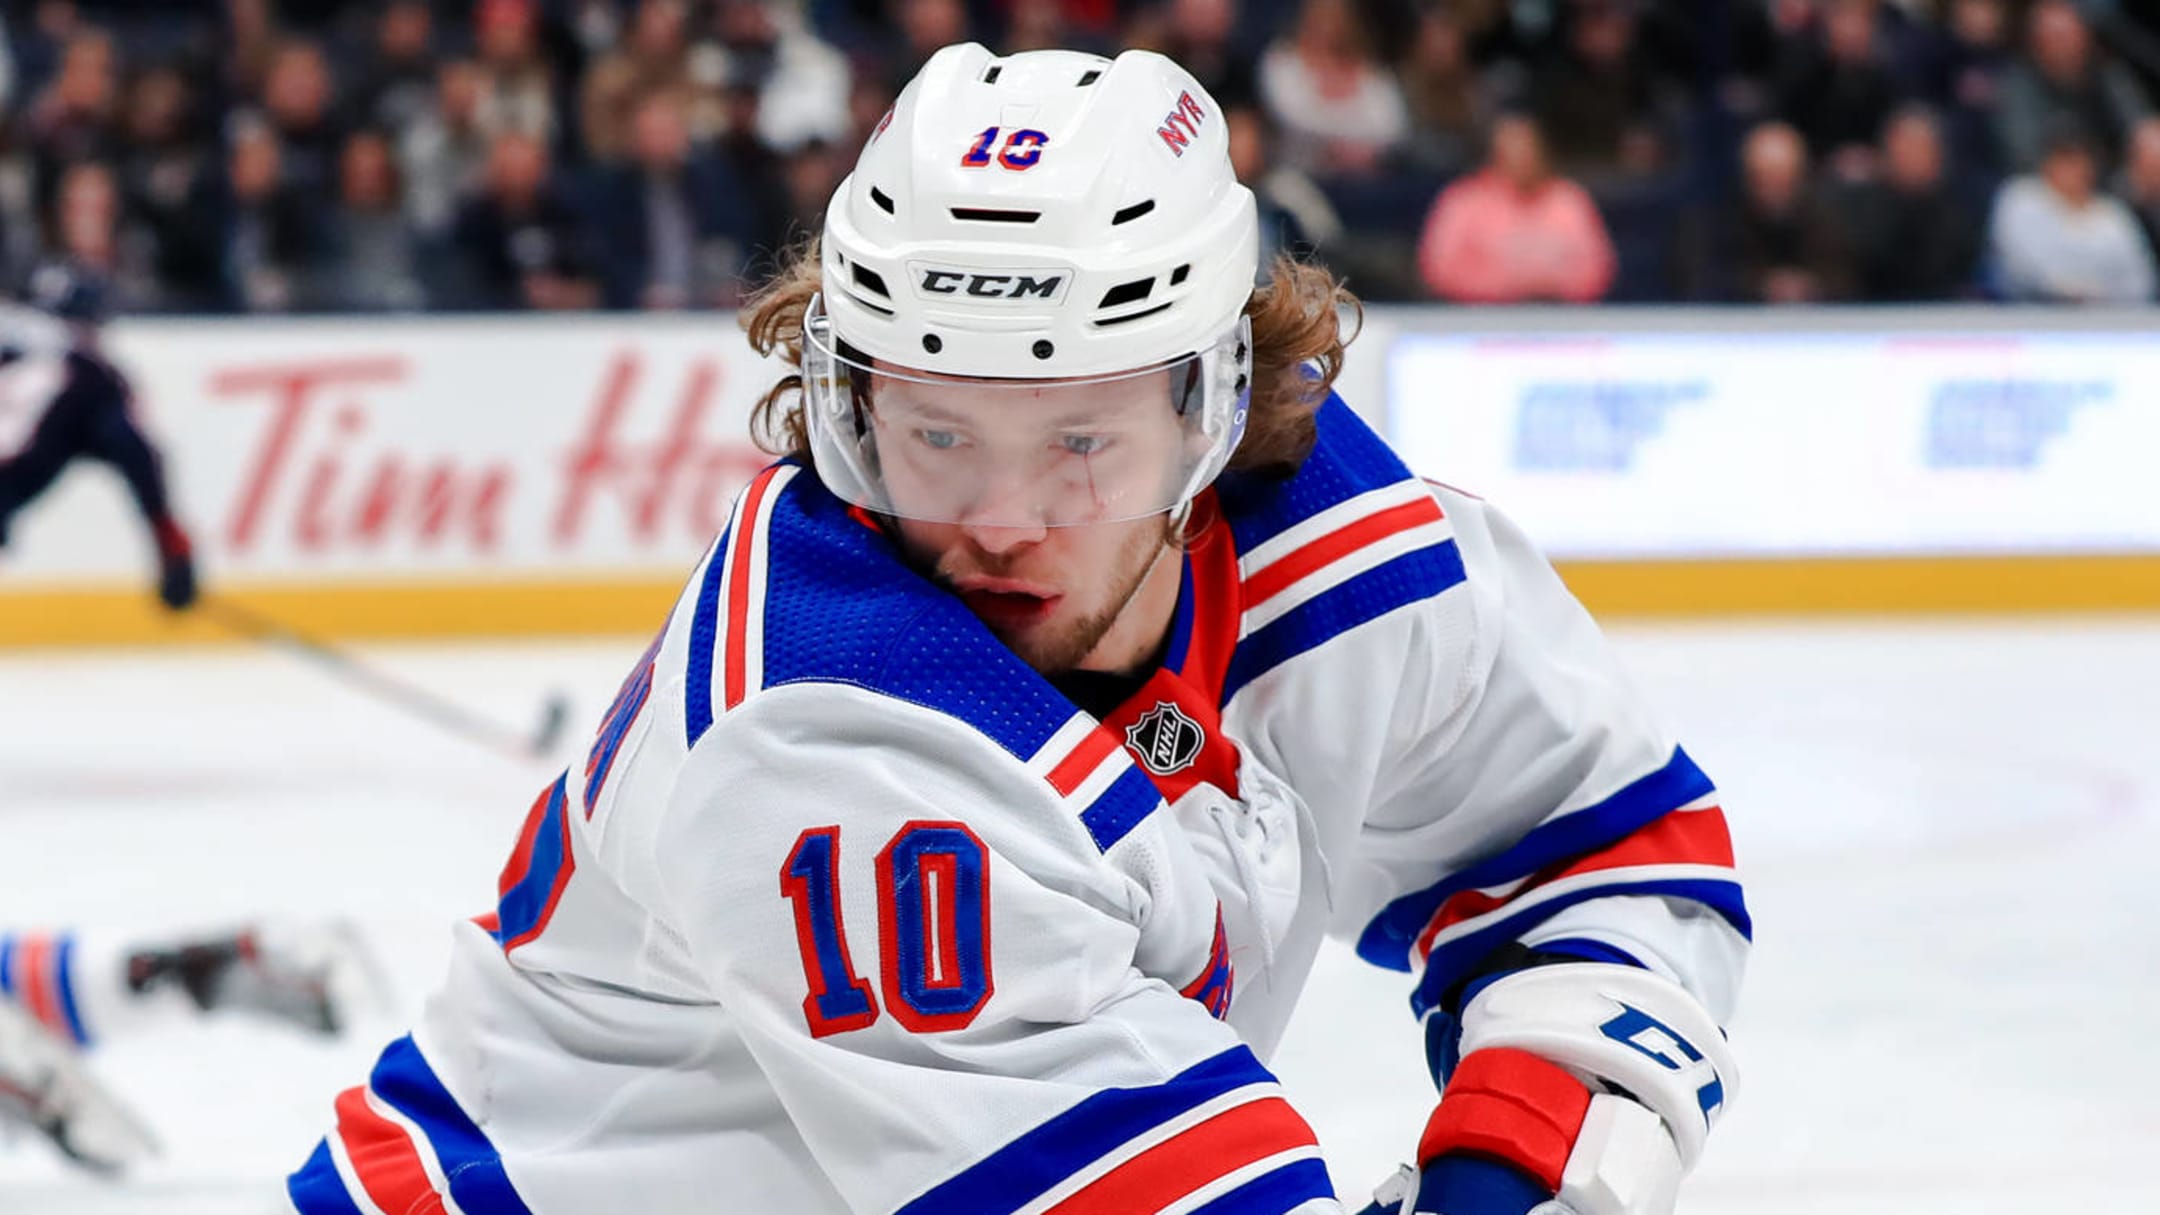 Thoughts on the Artemi Panarin leave of absence from the Rangers